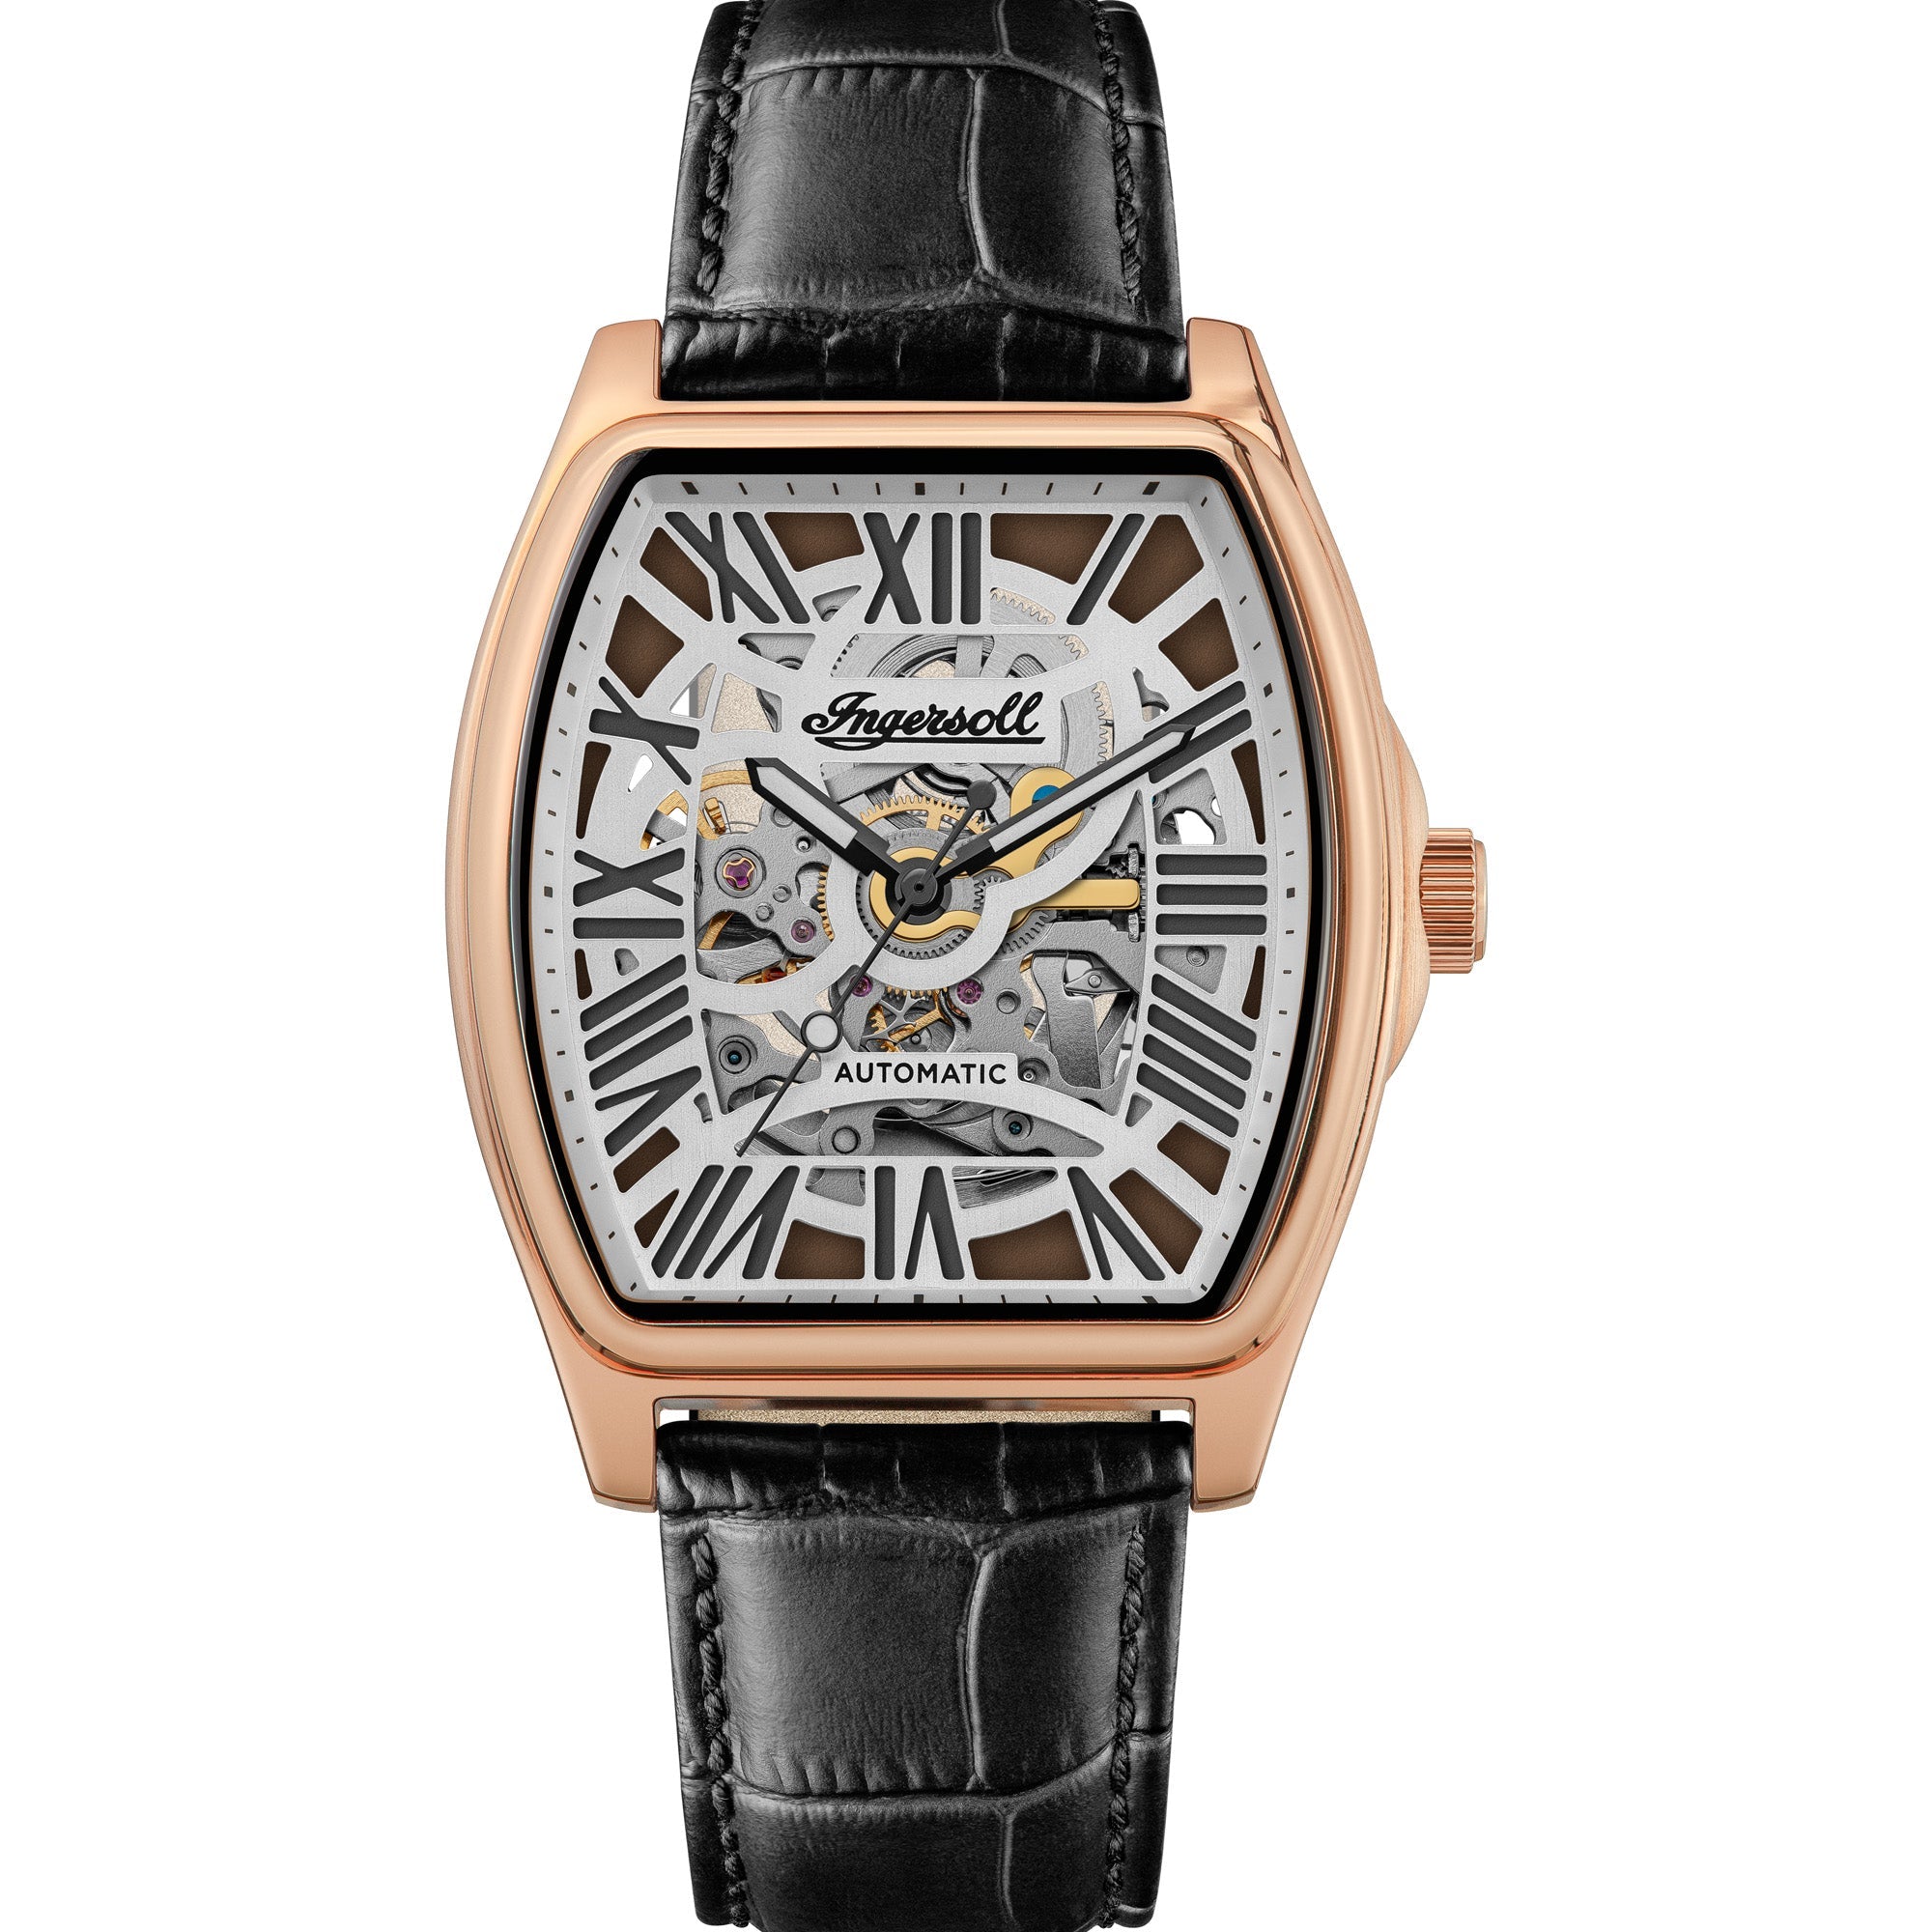 The California Automatic Rose Gold Black Leather Strap Watch